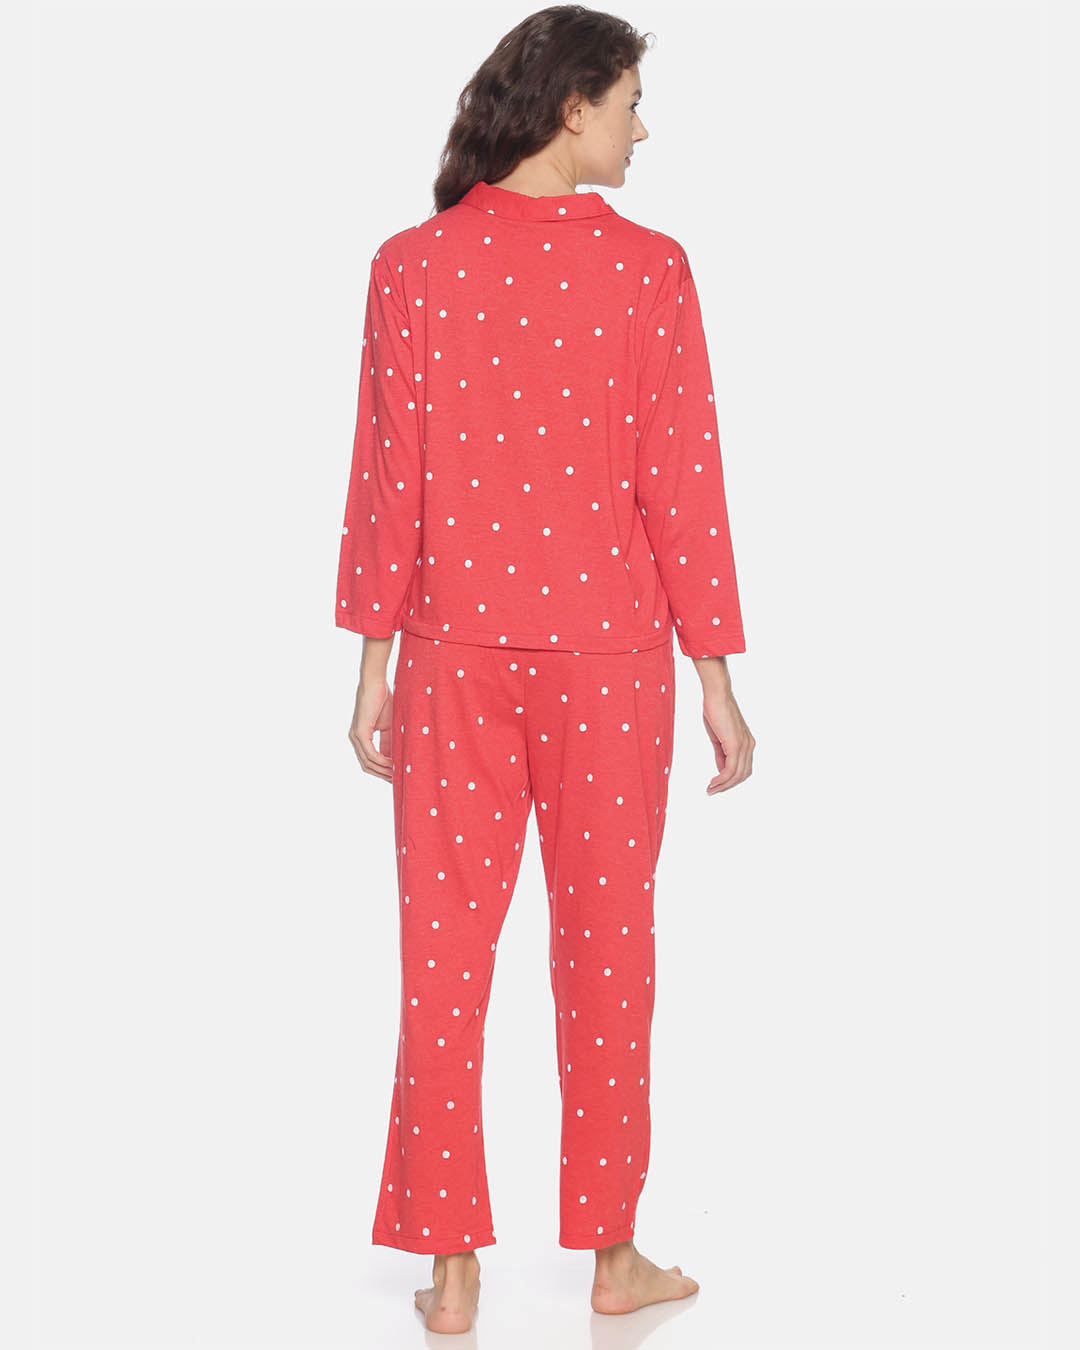 Shop Women's Red Printed Stylish Night Suit-Back